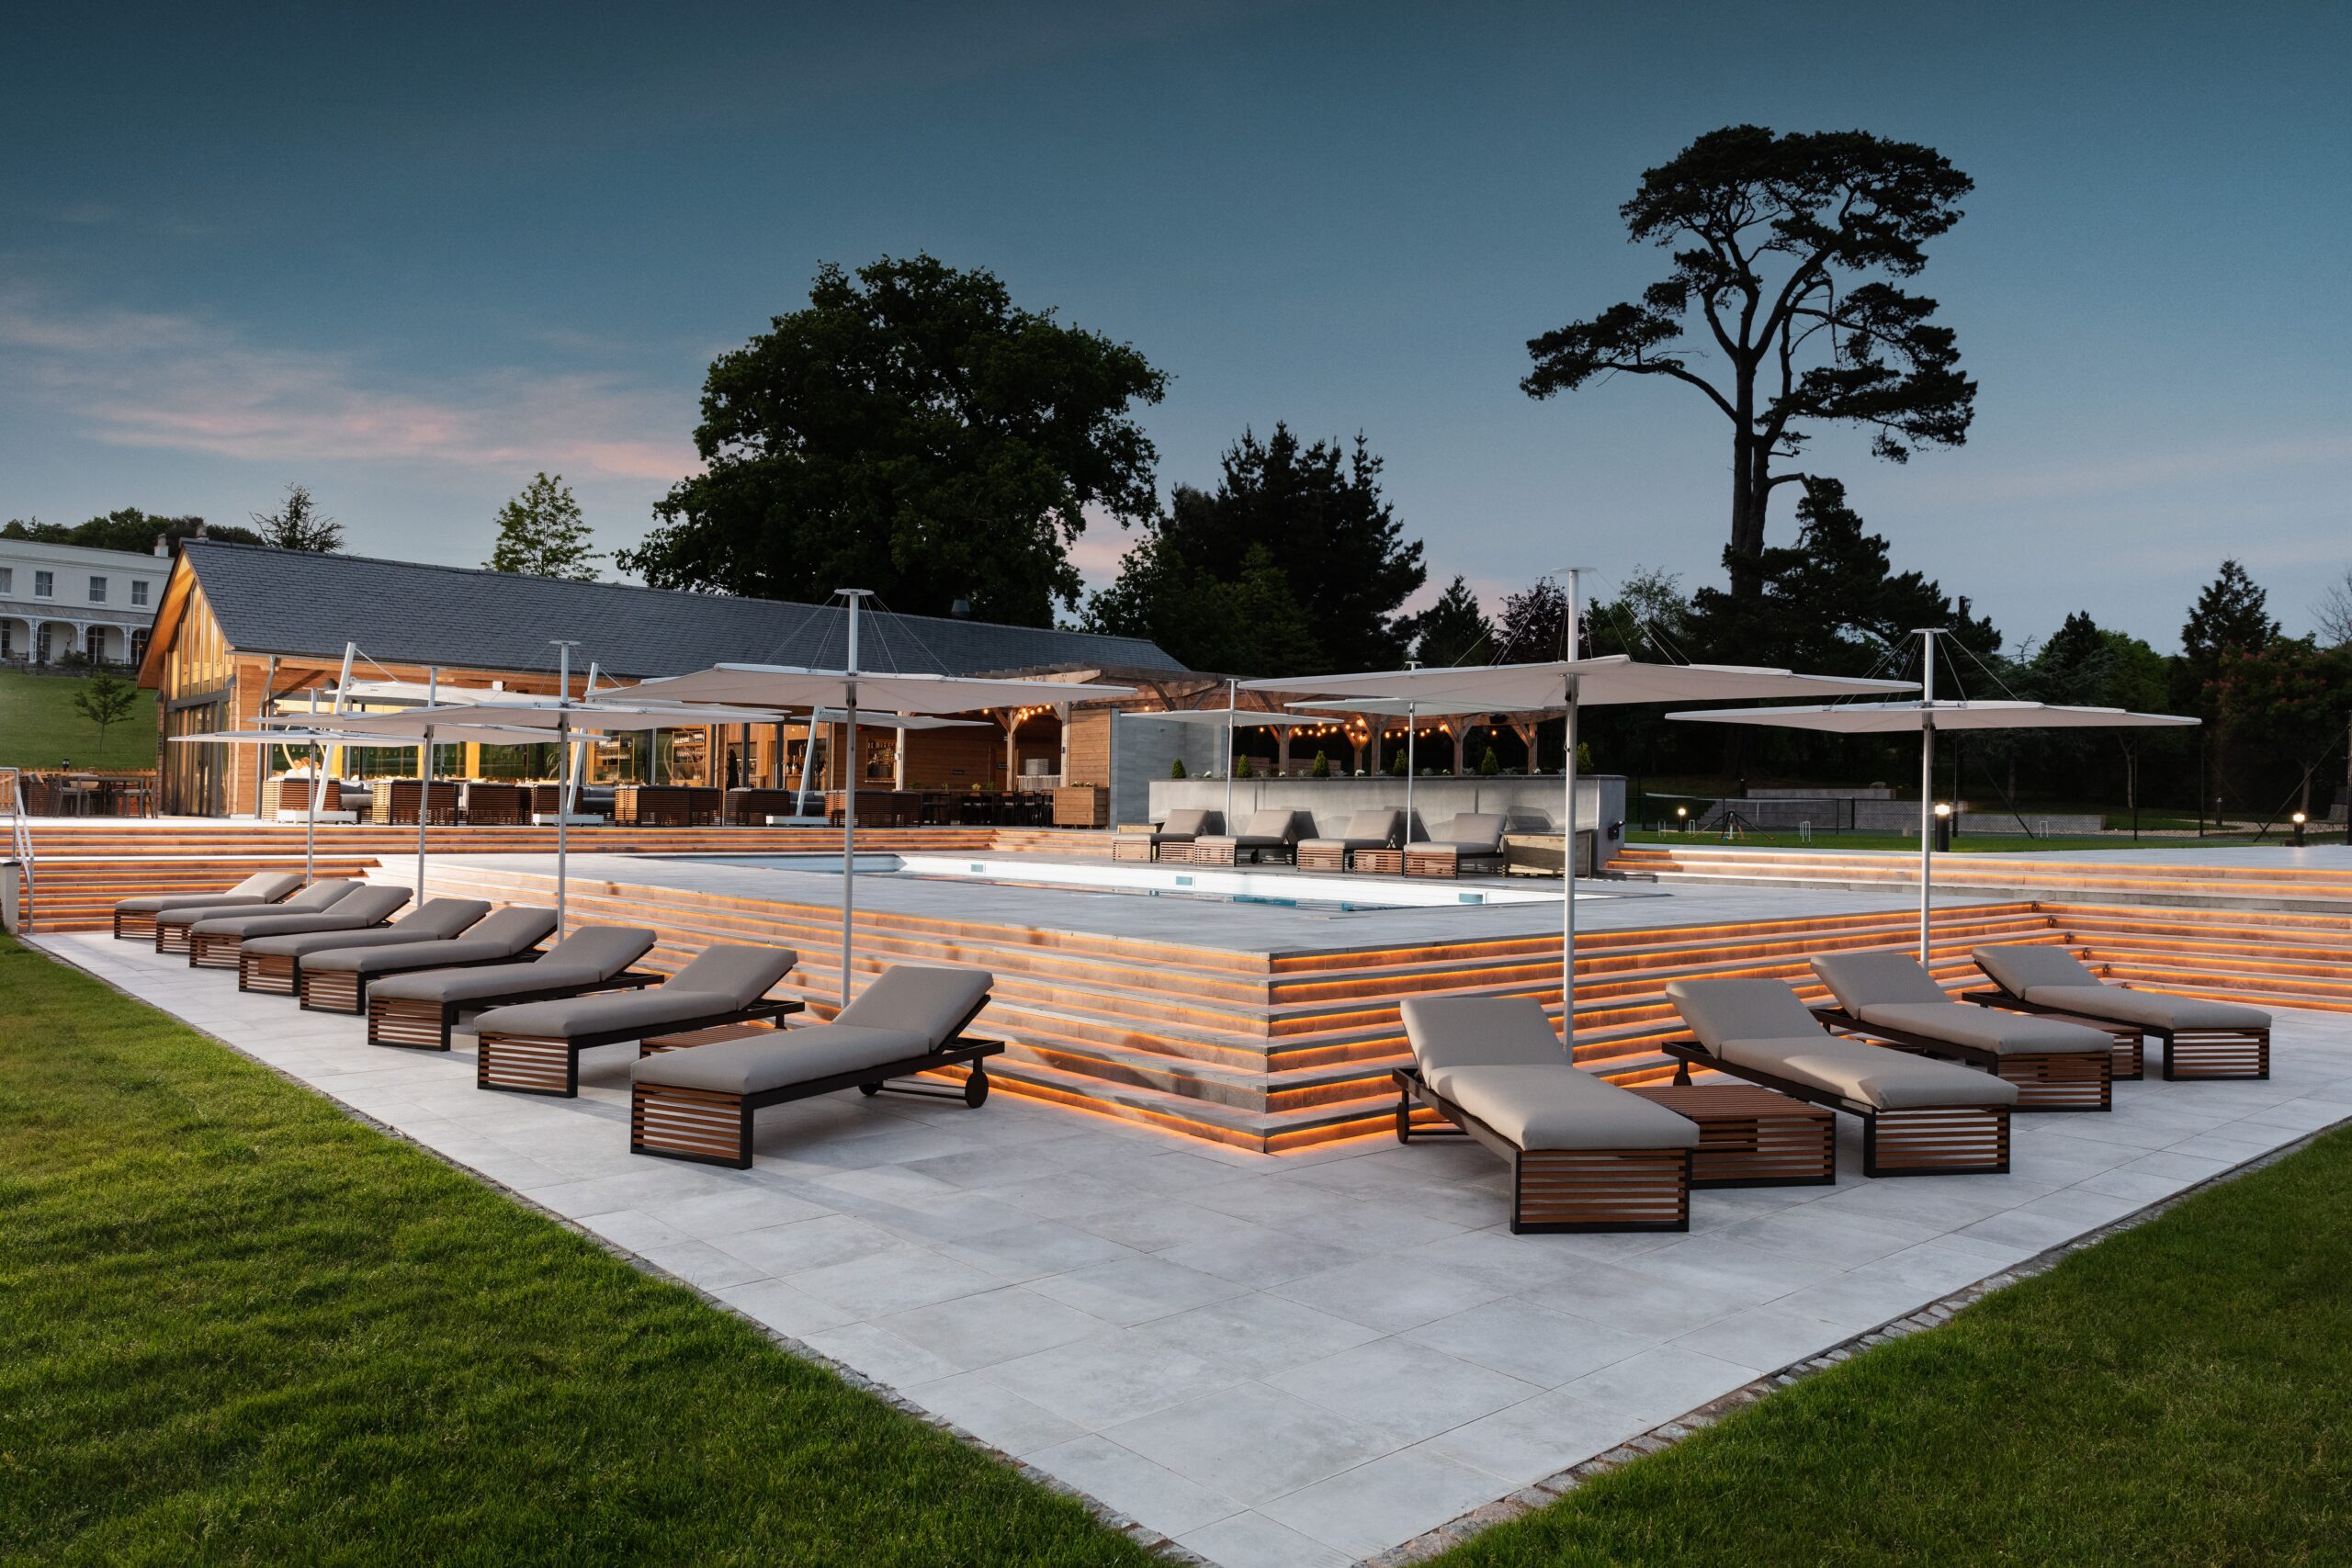 Pool House Restaurant and Bar at Lympstone Manor